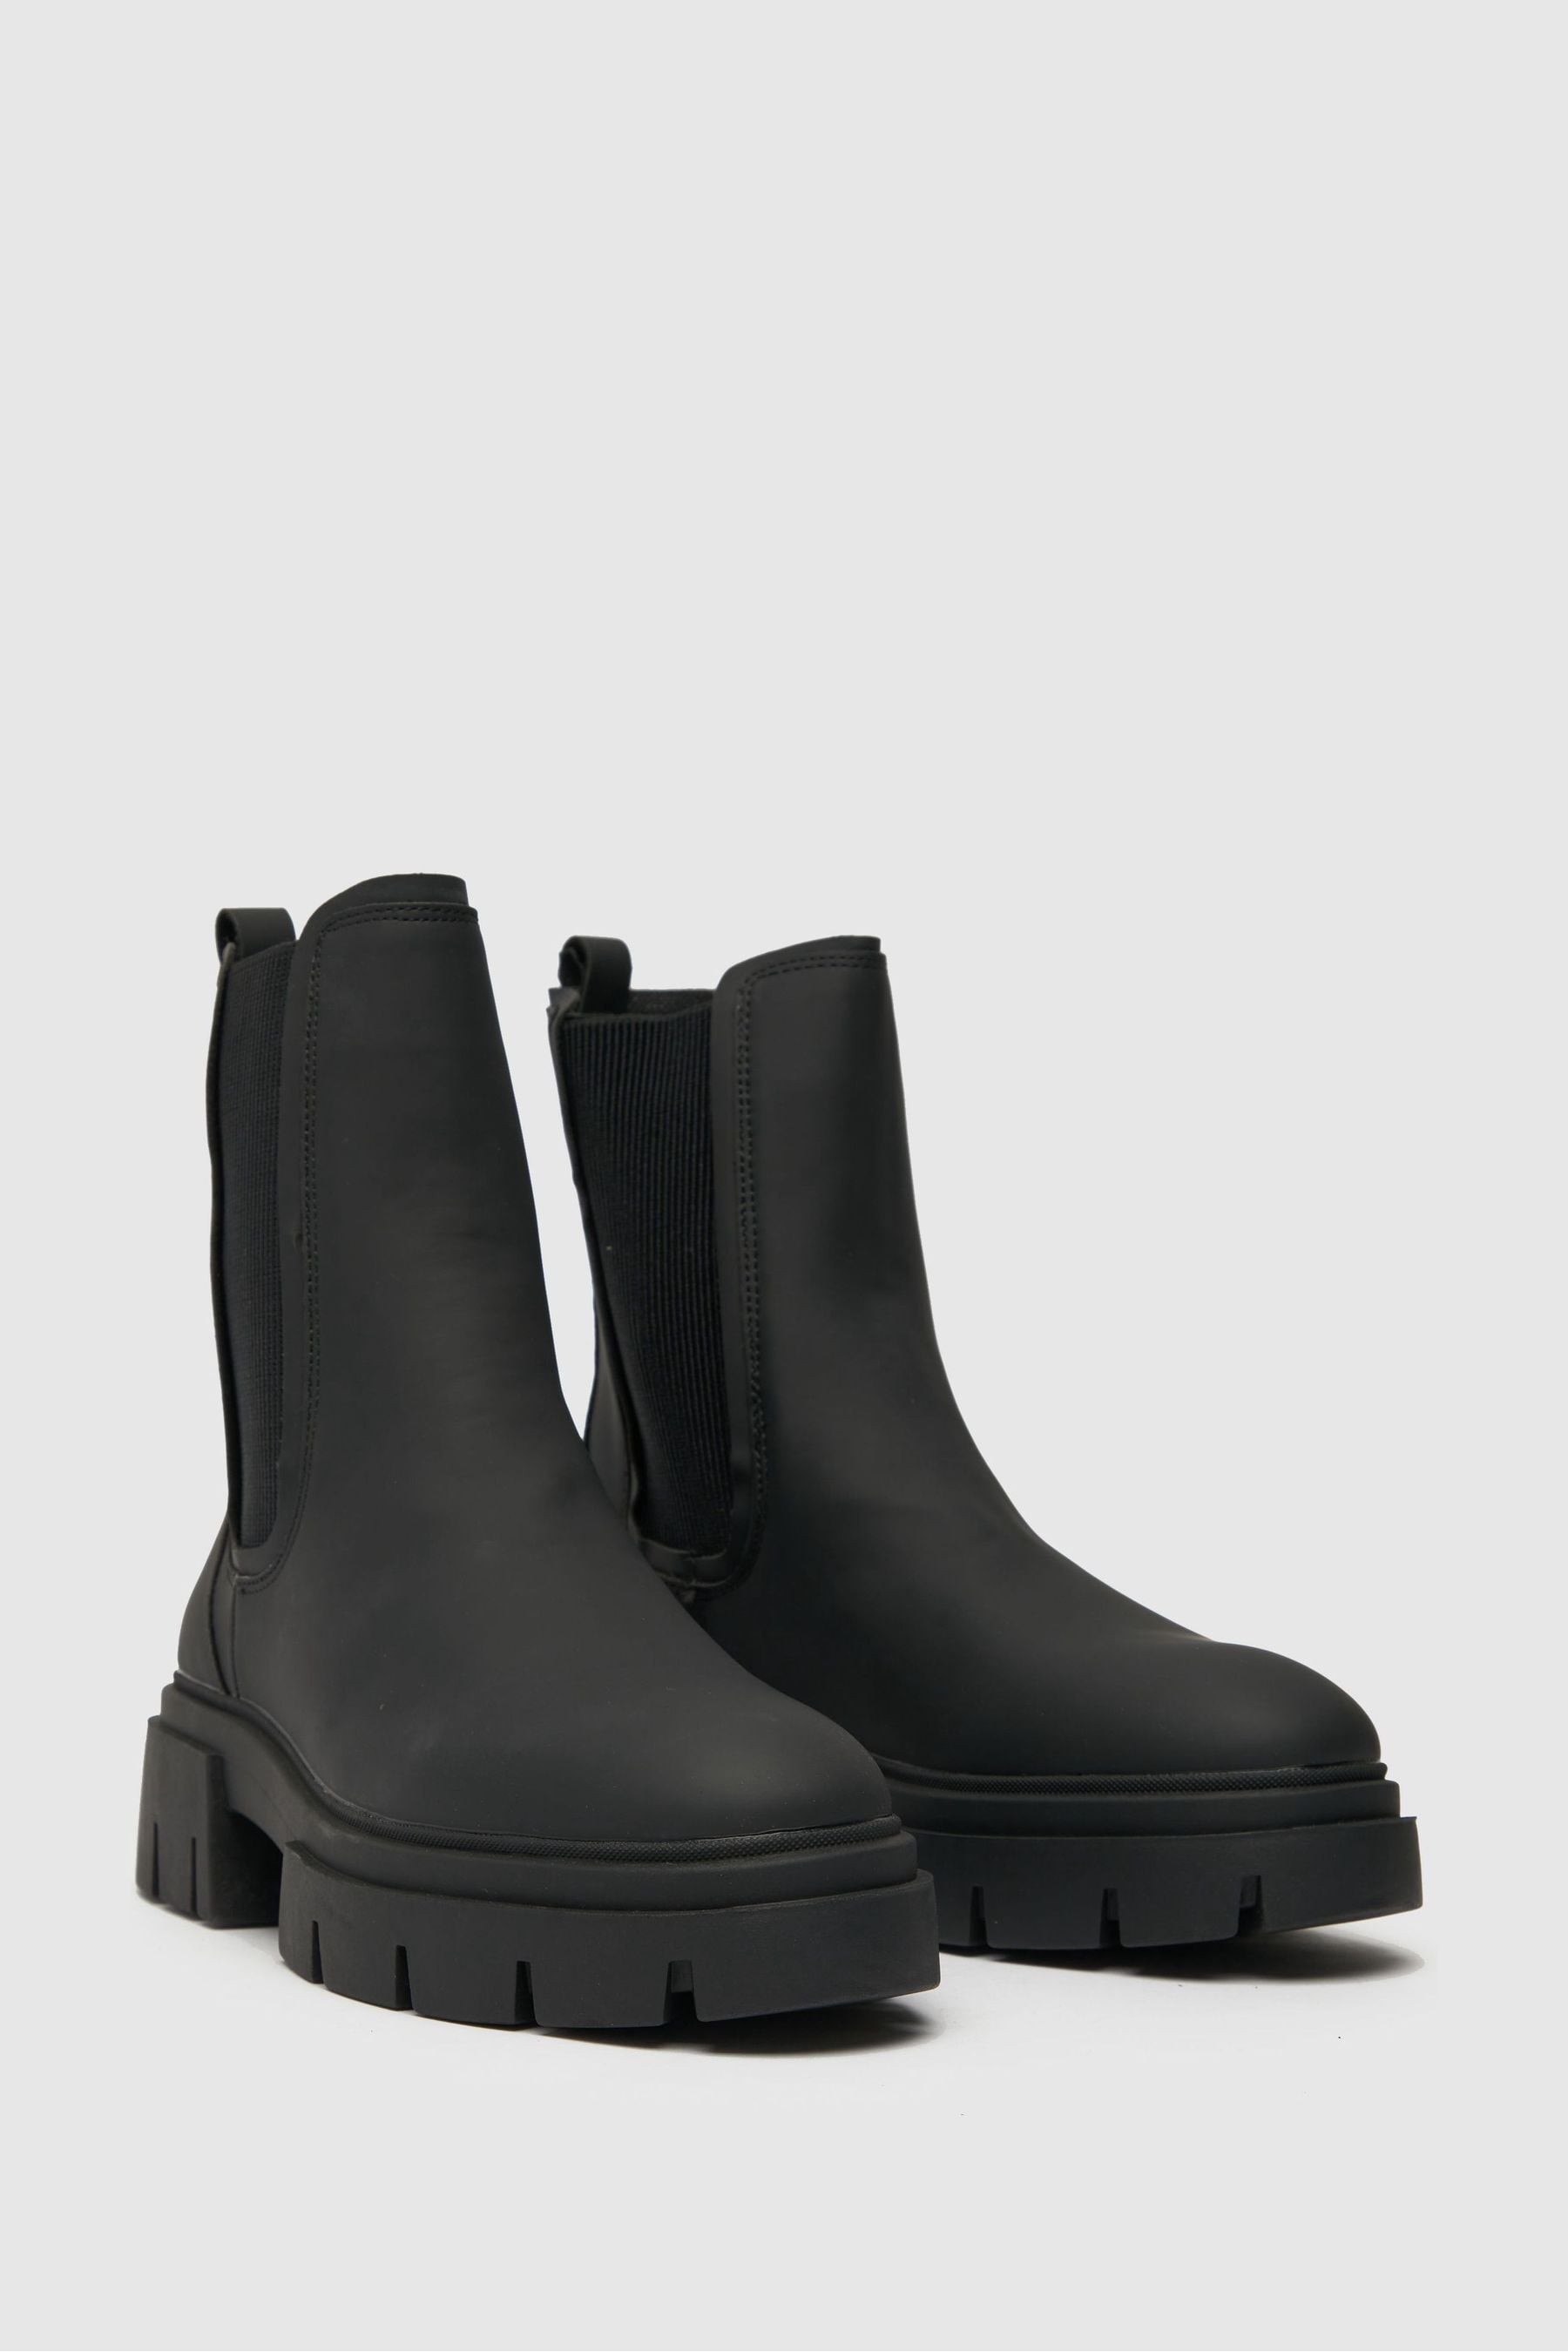 Buy Schuh Amaya Chunky Chelsea Black Boots from the Next UK online shop